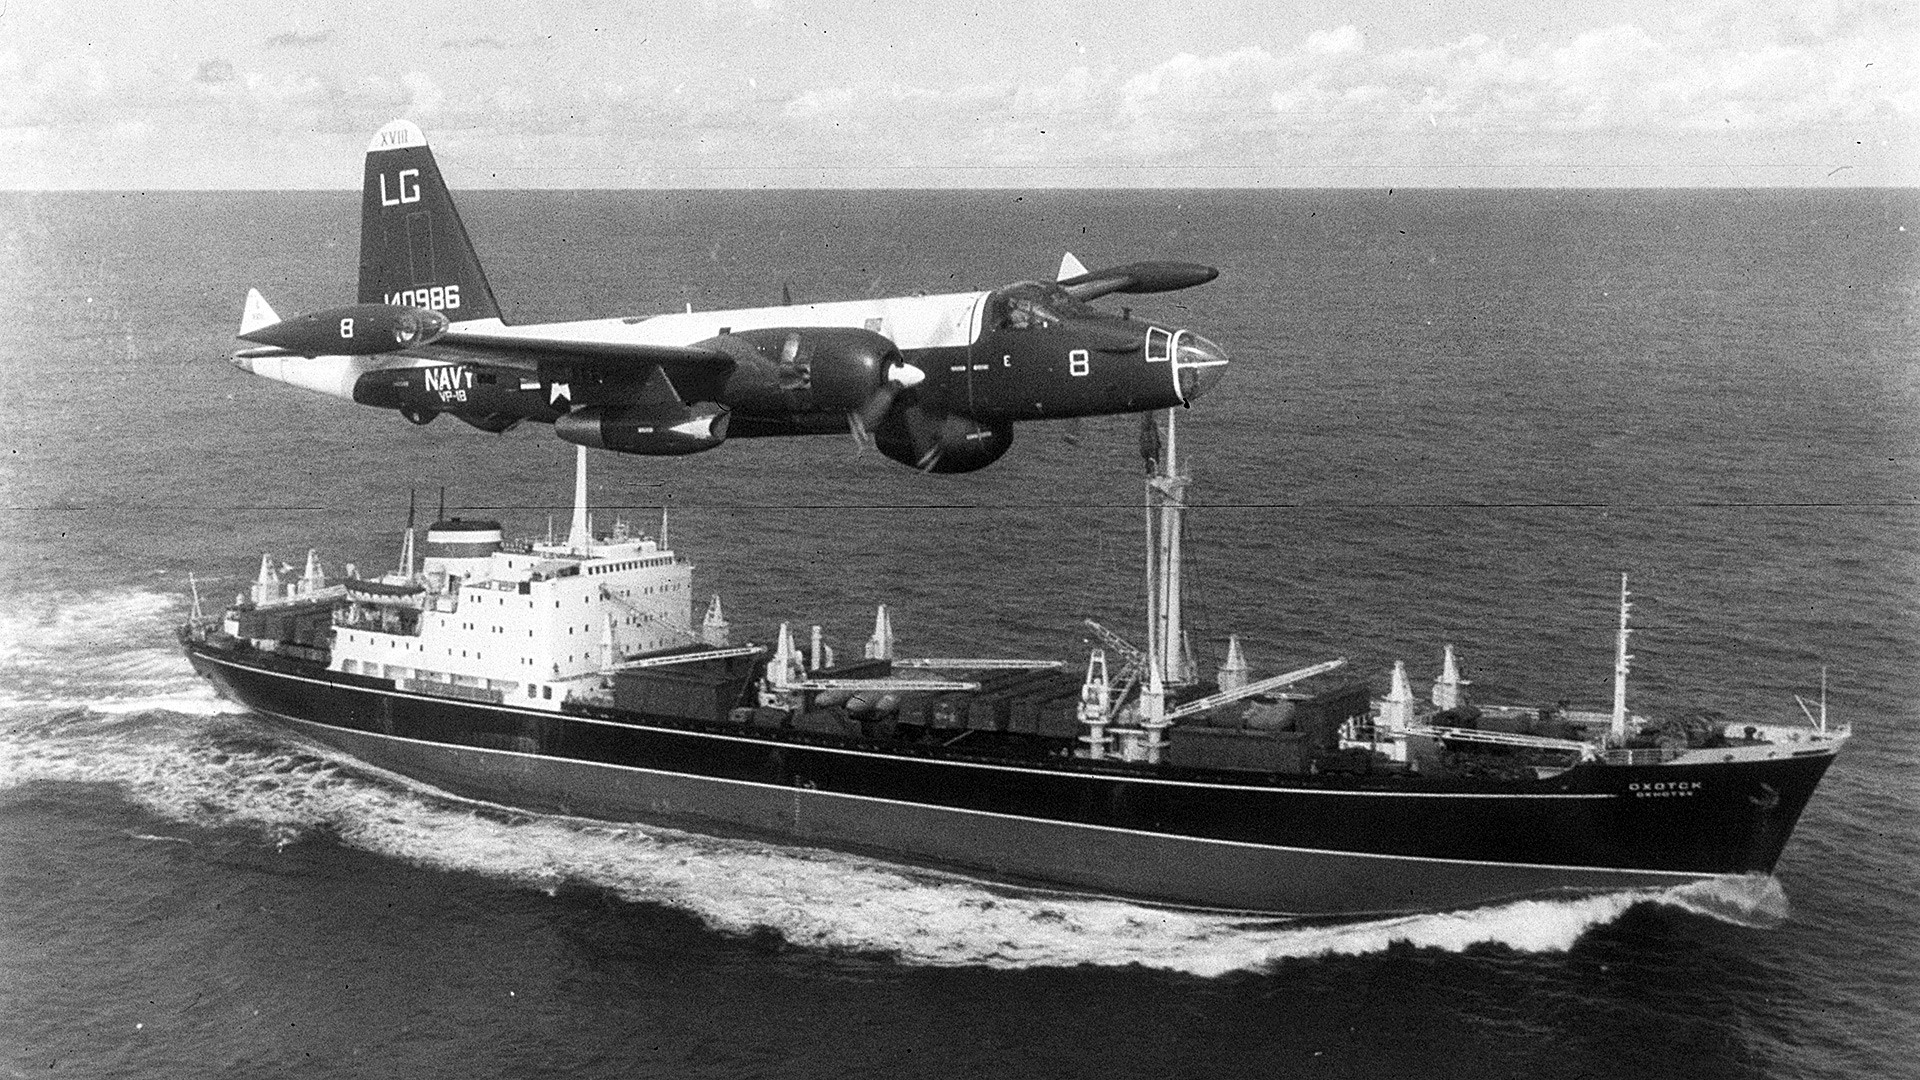 A P2V Neptune US patrol plane flying over a Soviet freighter during the Cuban missile crisis.